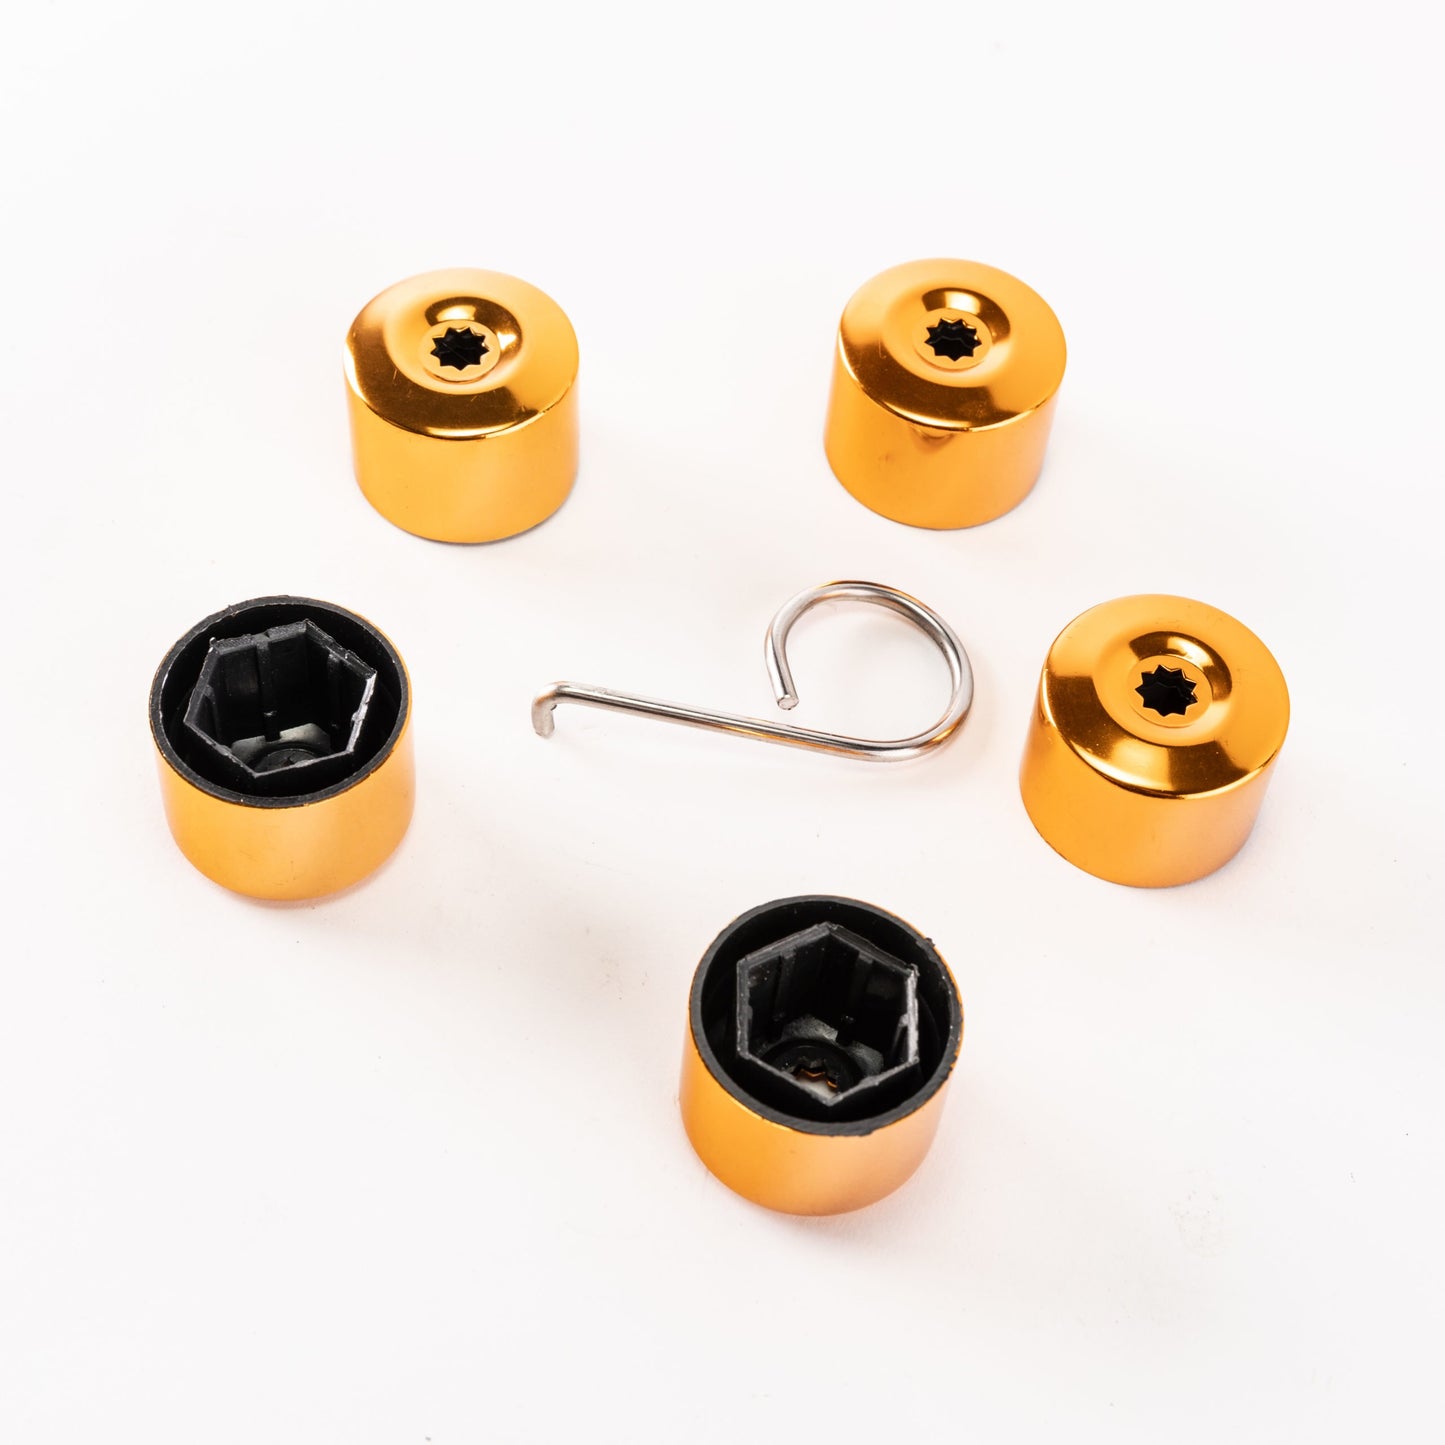 VAN-X Gold Protective Wheel Nut / Bolt Covers 17Mm (Set of 20) 2 - CD-G222